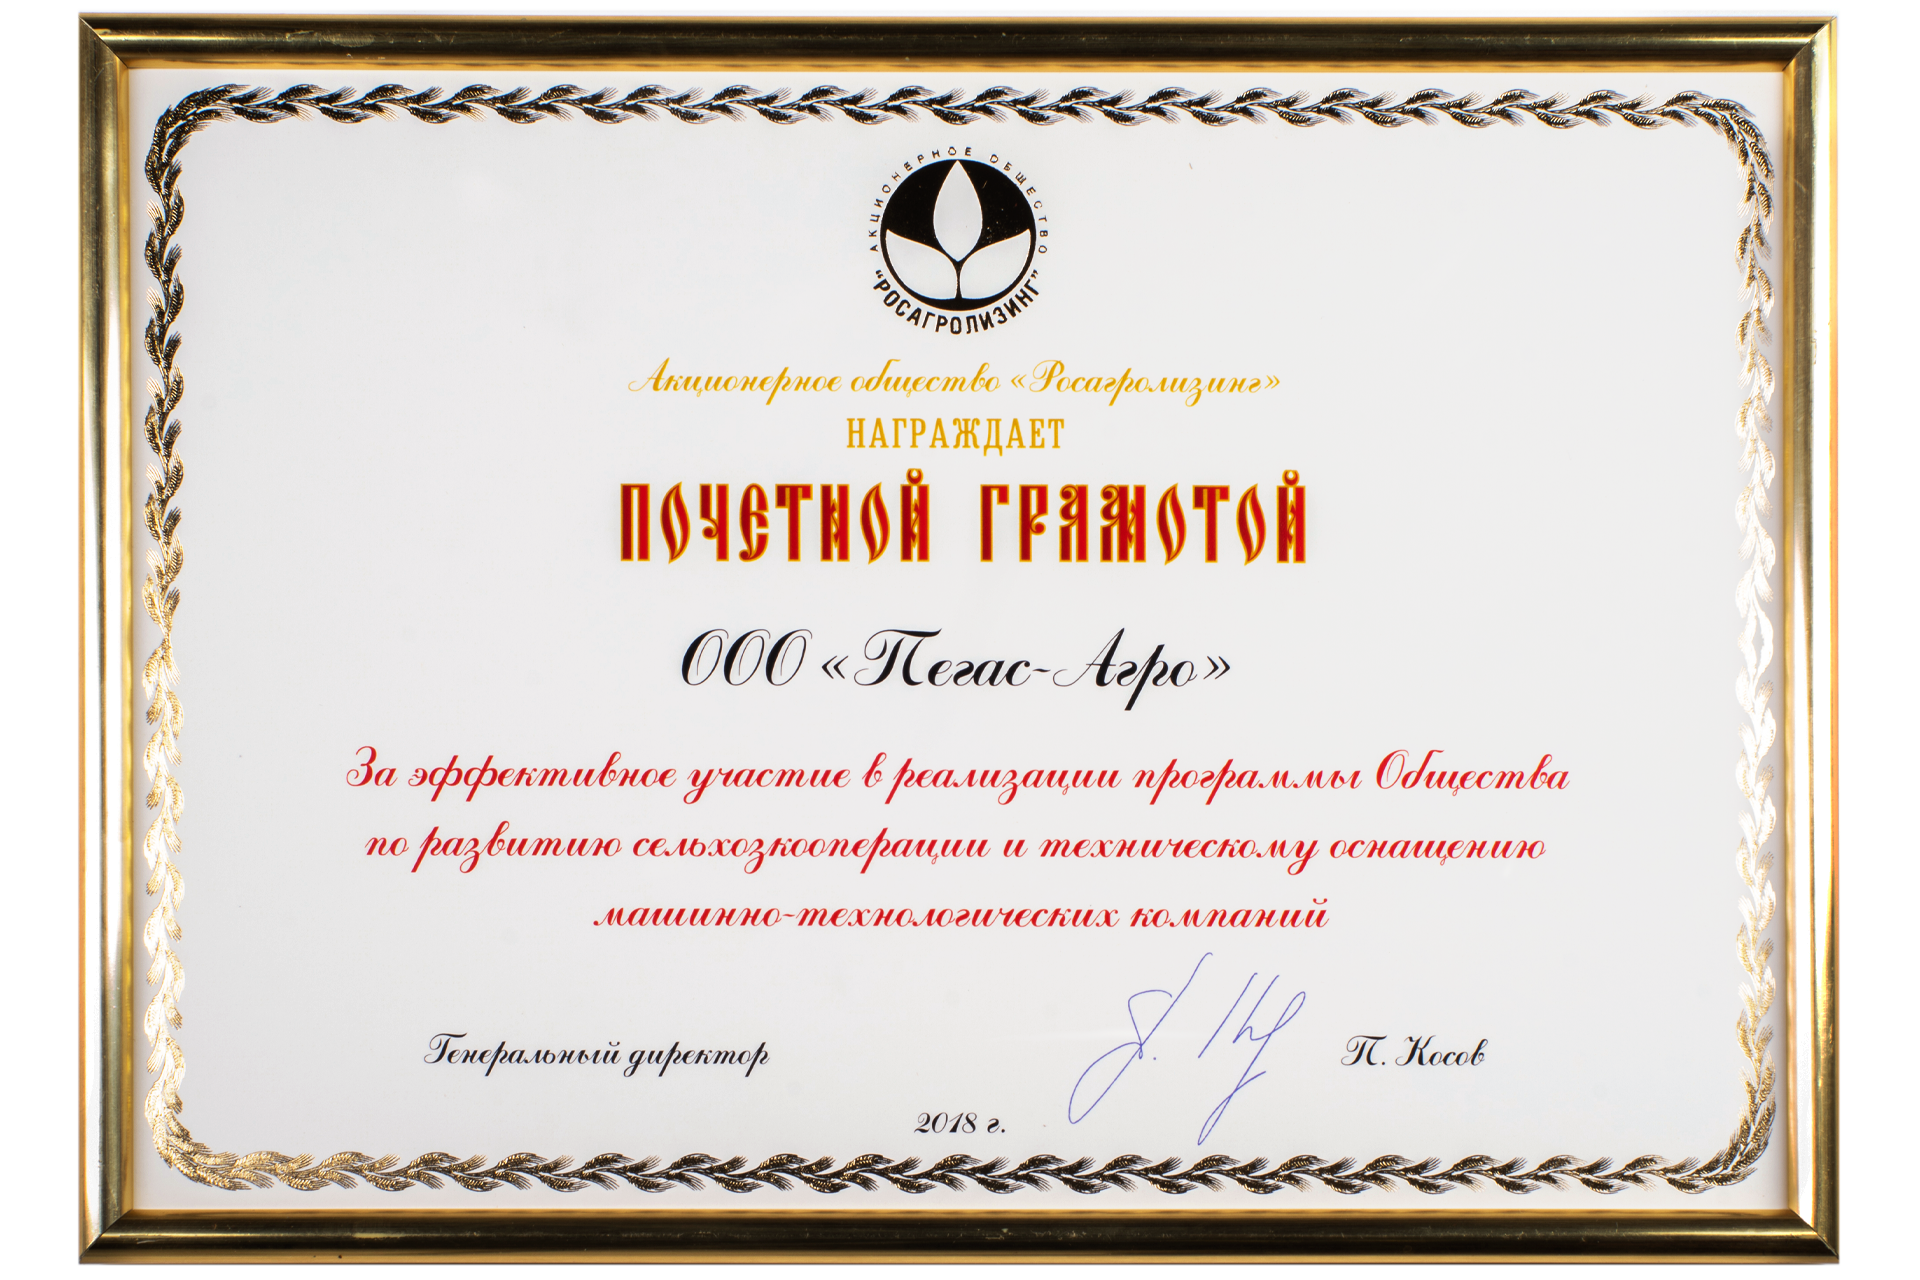 Certificate of Appreciation, JSC “RosAgroLeasing”, Moscow